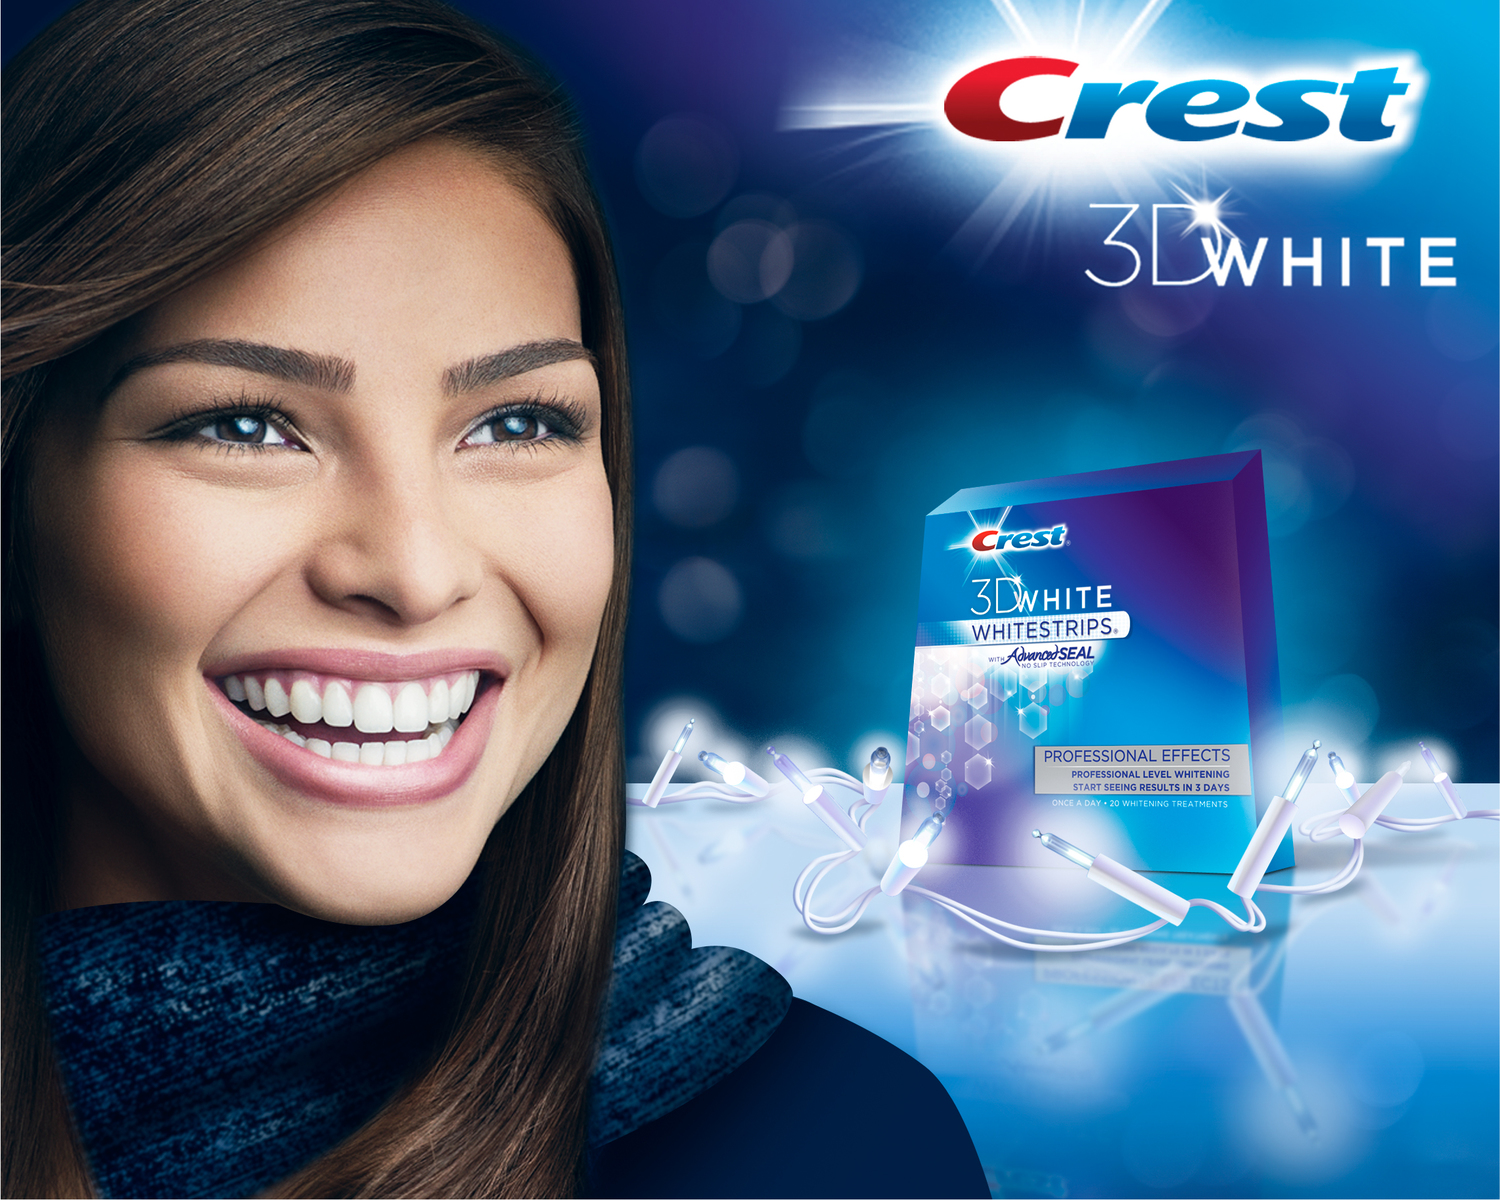 Crest_3D_White_Professional_Effects_Whitestrips_Holiday_Image_2010